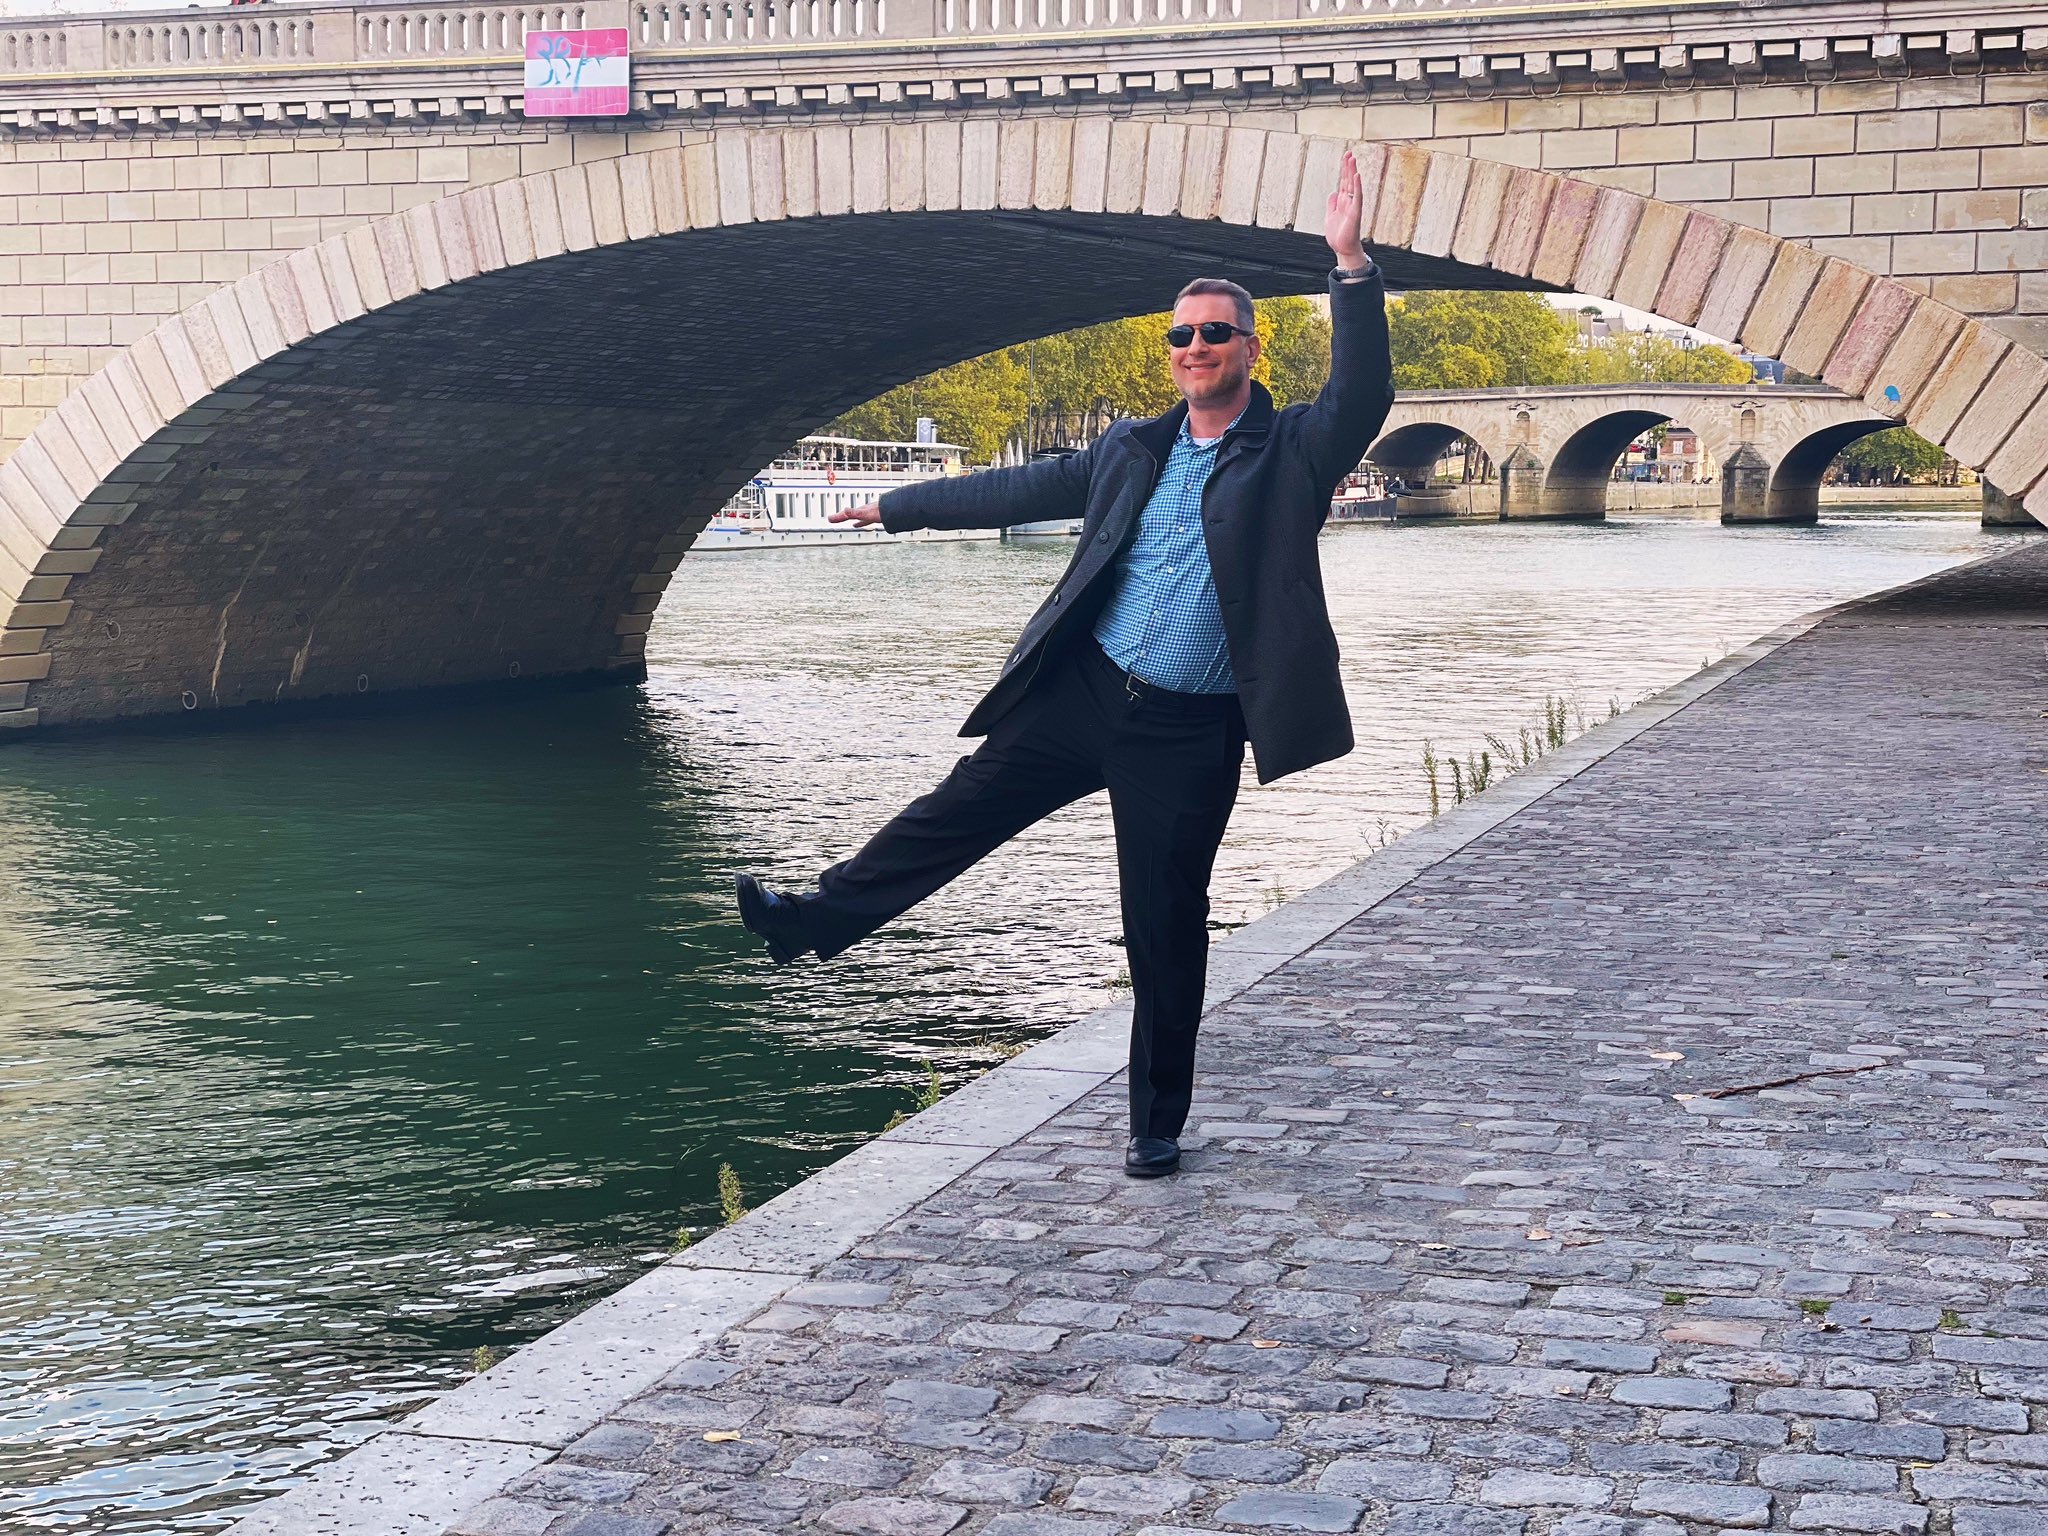 Me, hamming it up along the Seine